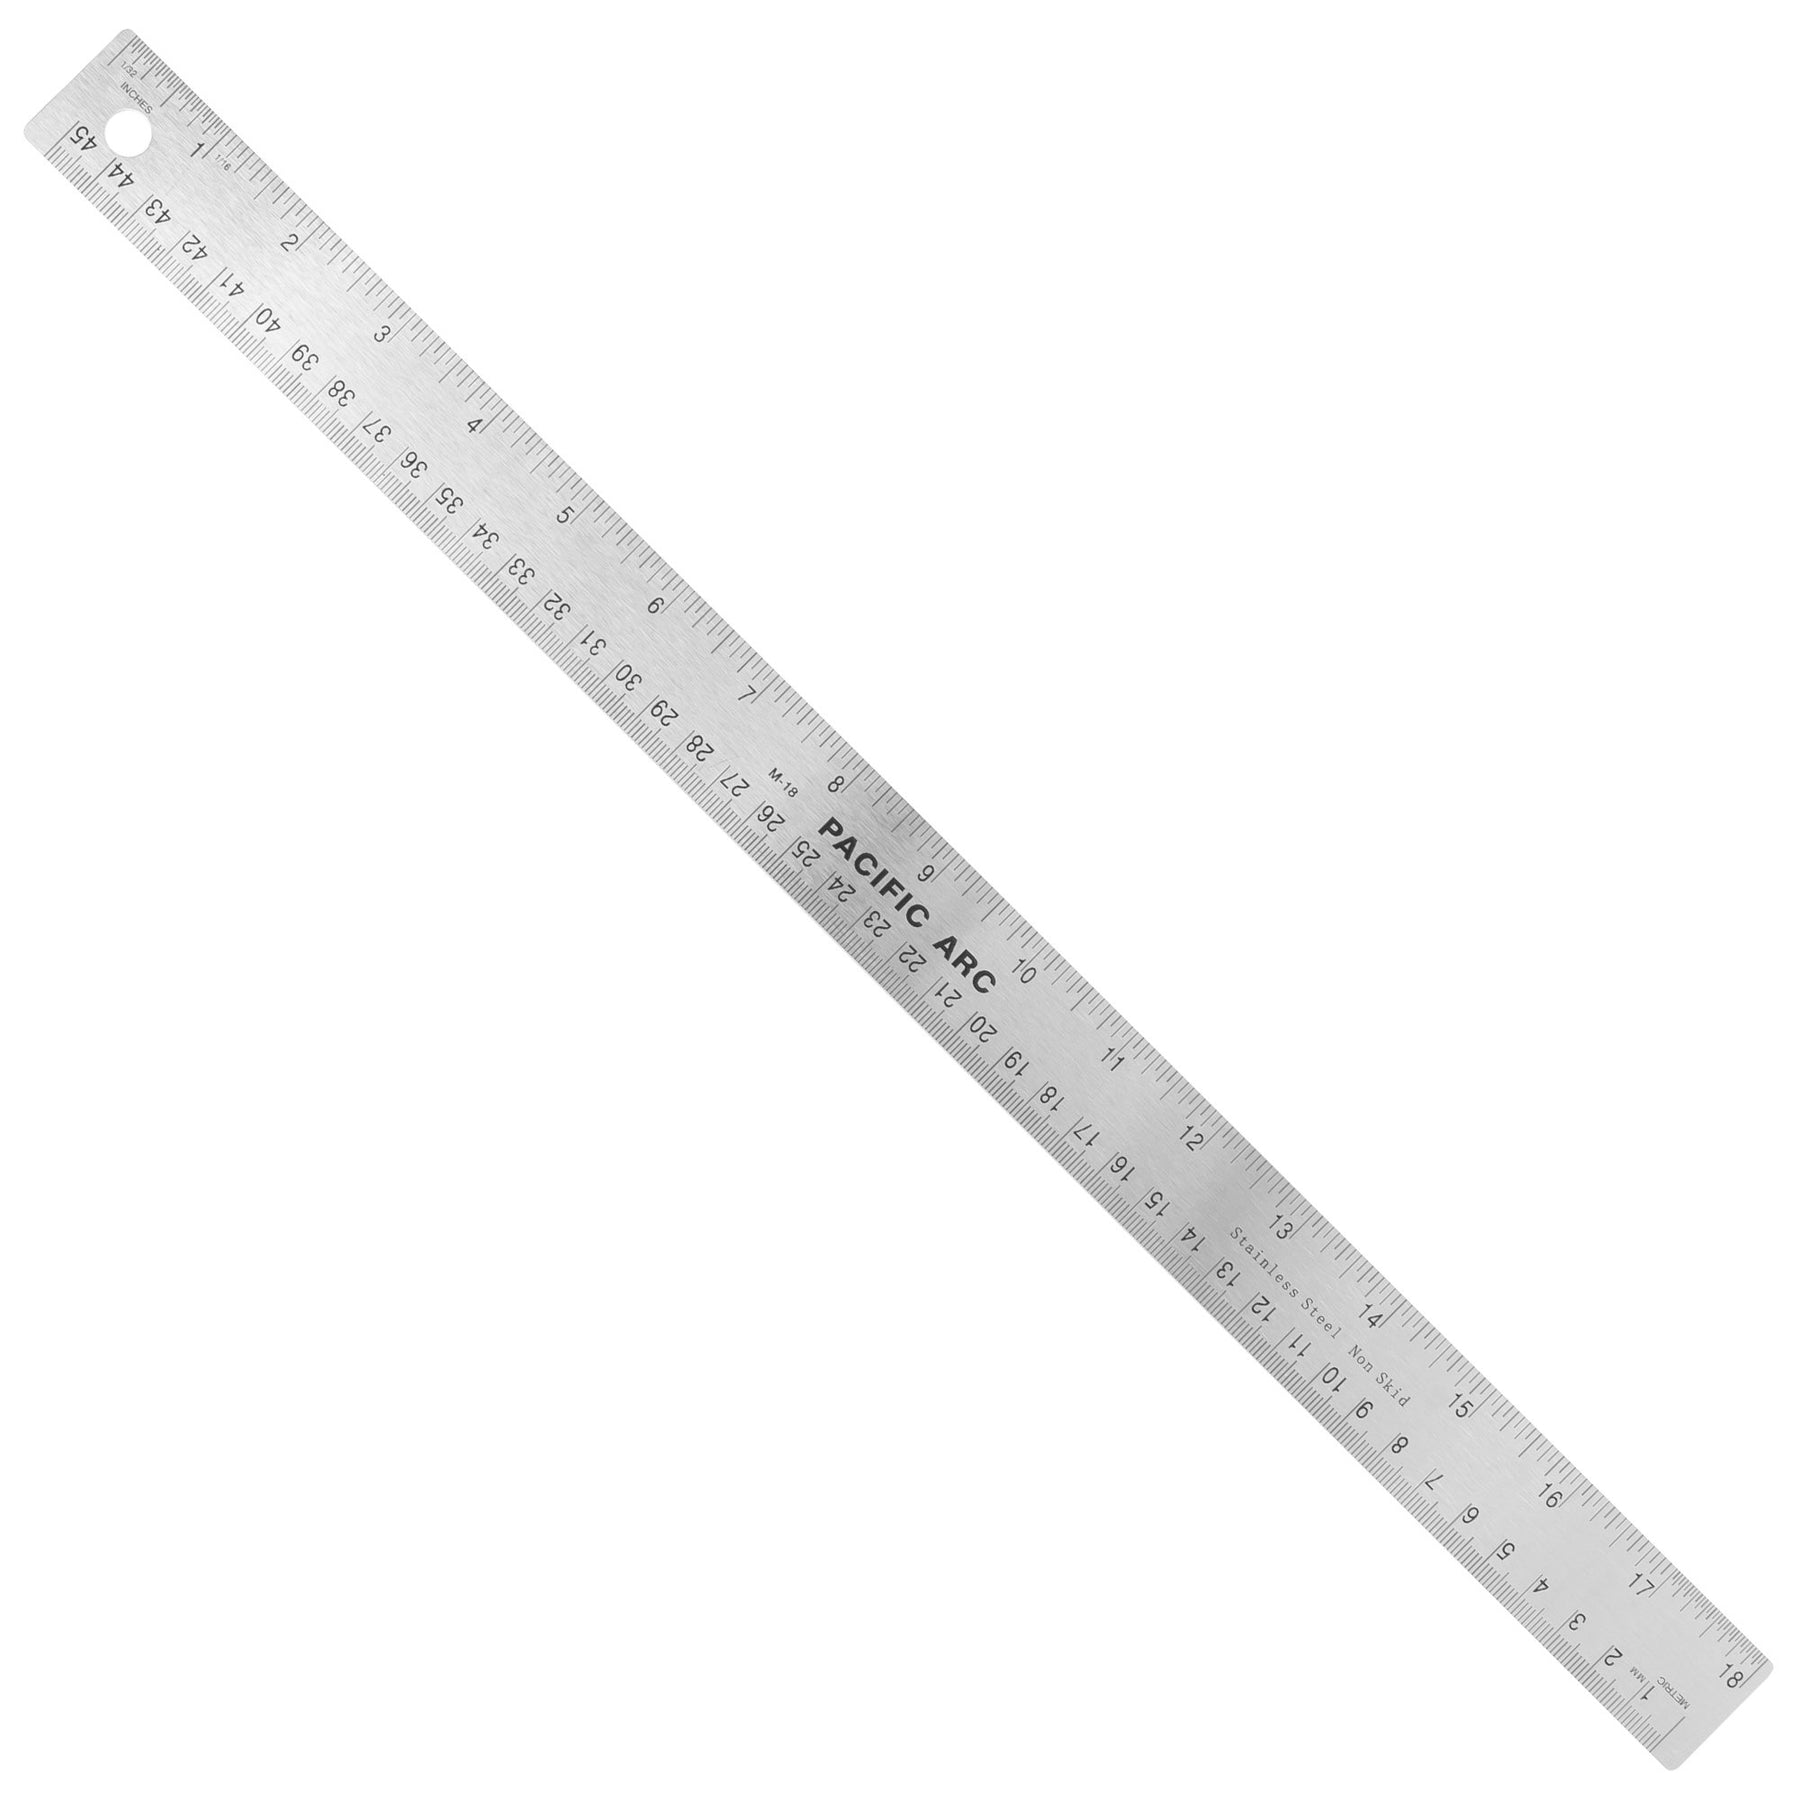 Pacific Arc Stainless Steel Ruler with Inch and Metric(mm), Non Skid Cork  or Rubber Back